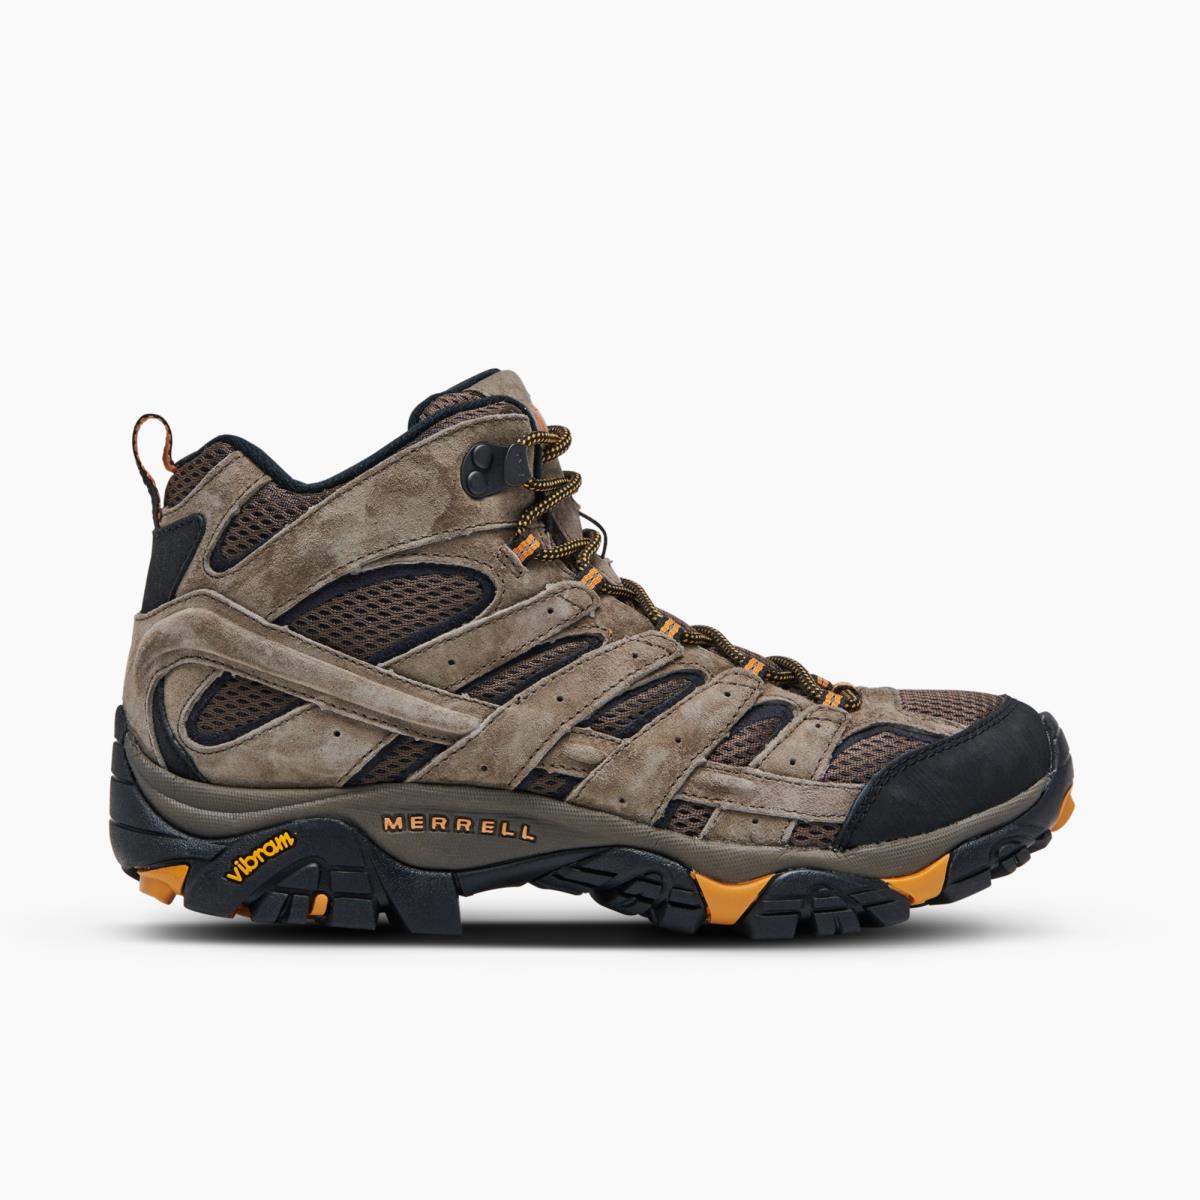 Merrell Men Moab 2 Mid Ventilator Wide Width Hiking Boots Suede Leather-and-mesh Walnut